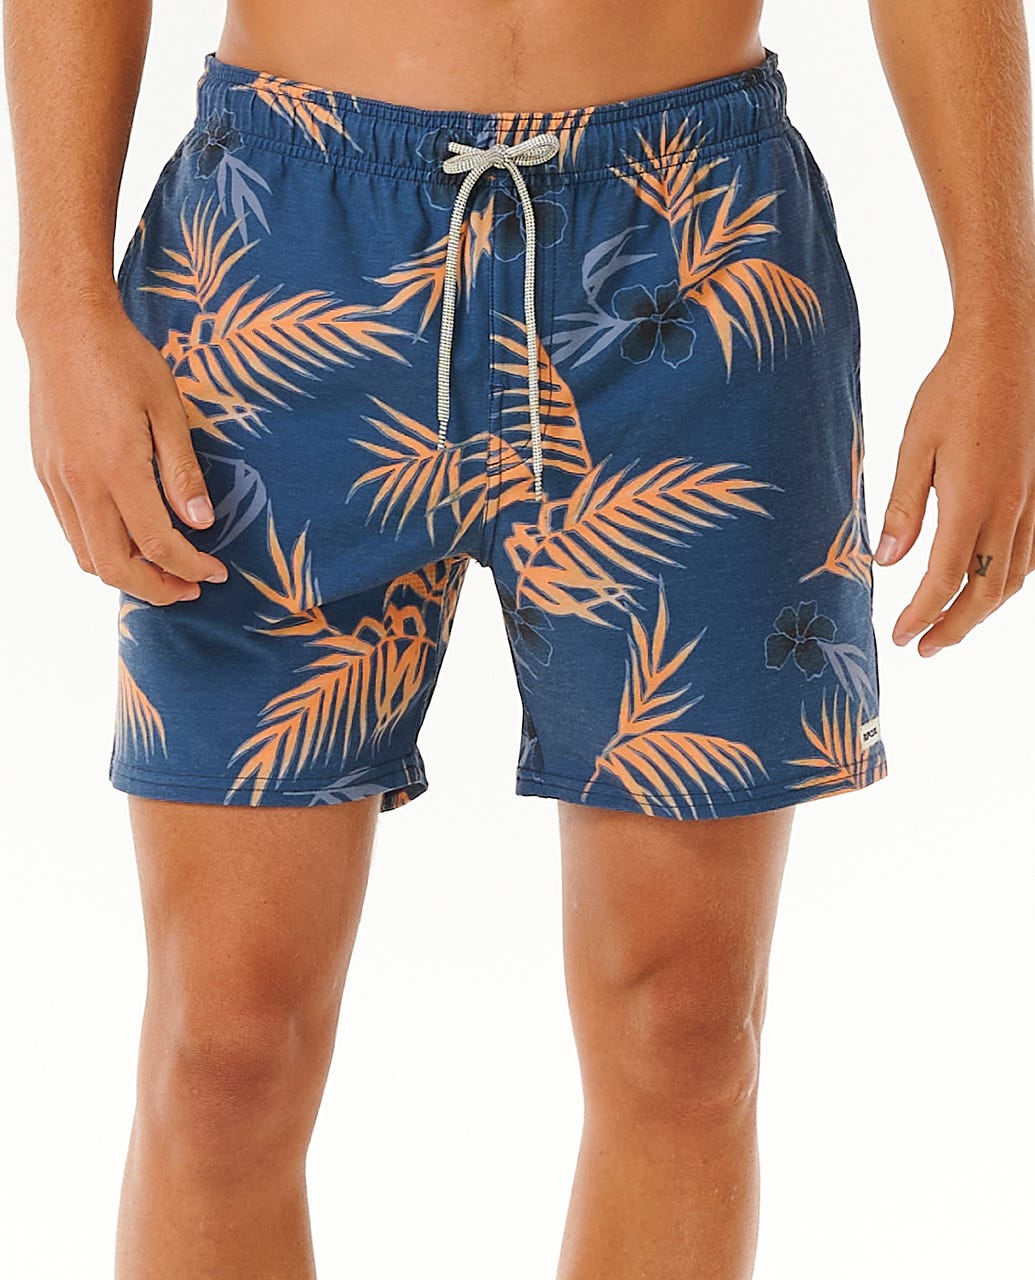 Rip Curl Surf Revival Floral 16" Volley Short - 9741 WASHED NAVY - Sun Diego Boardshop